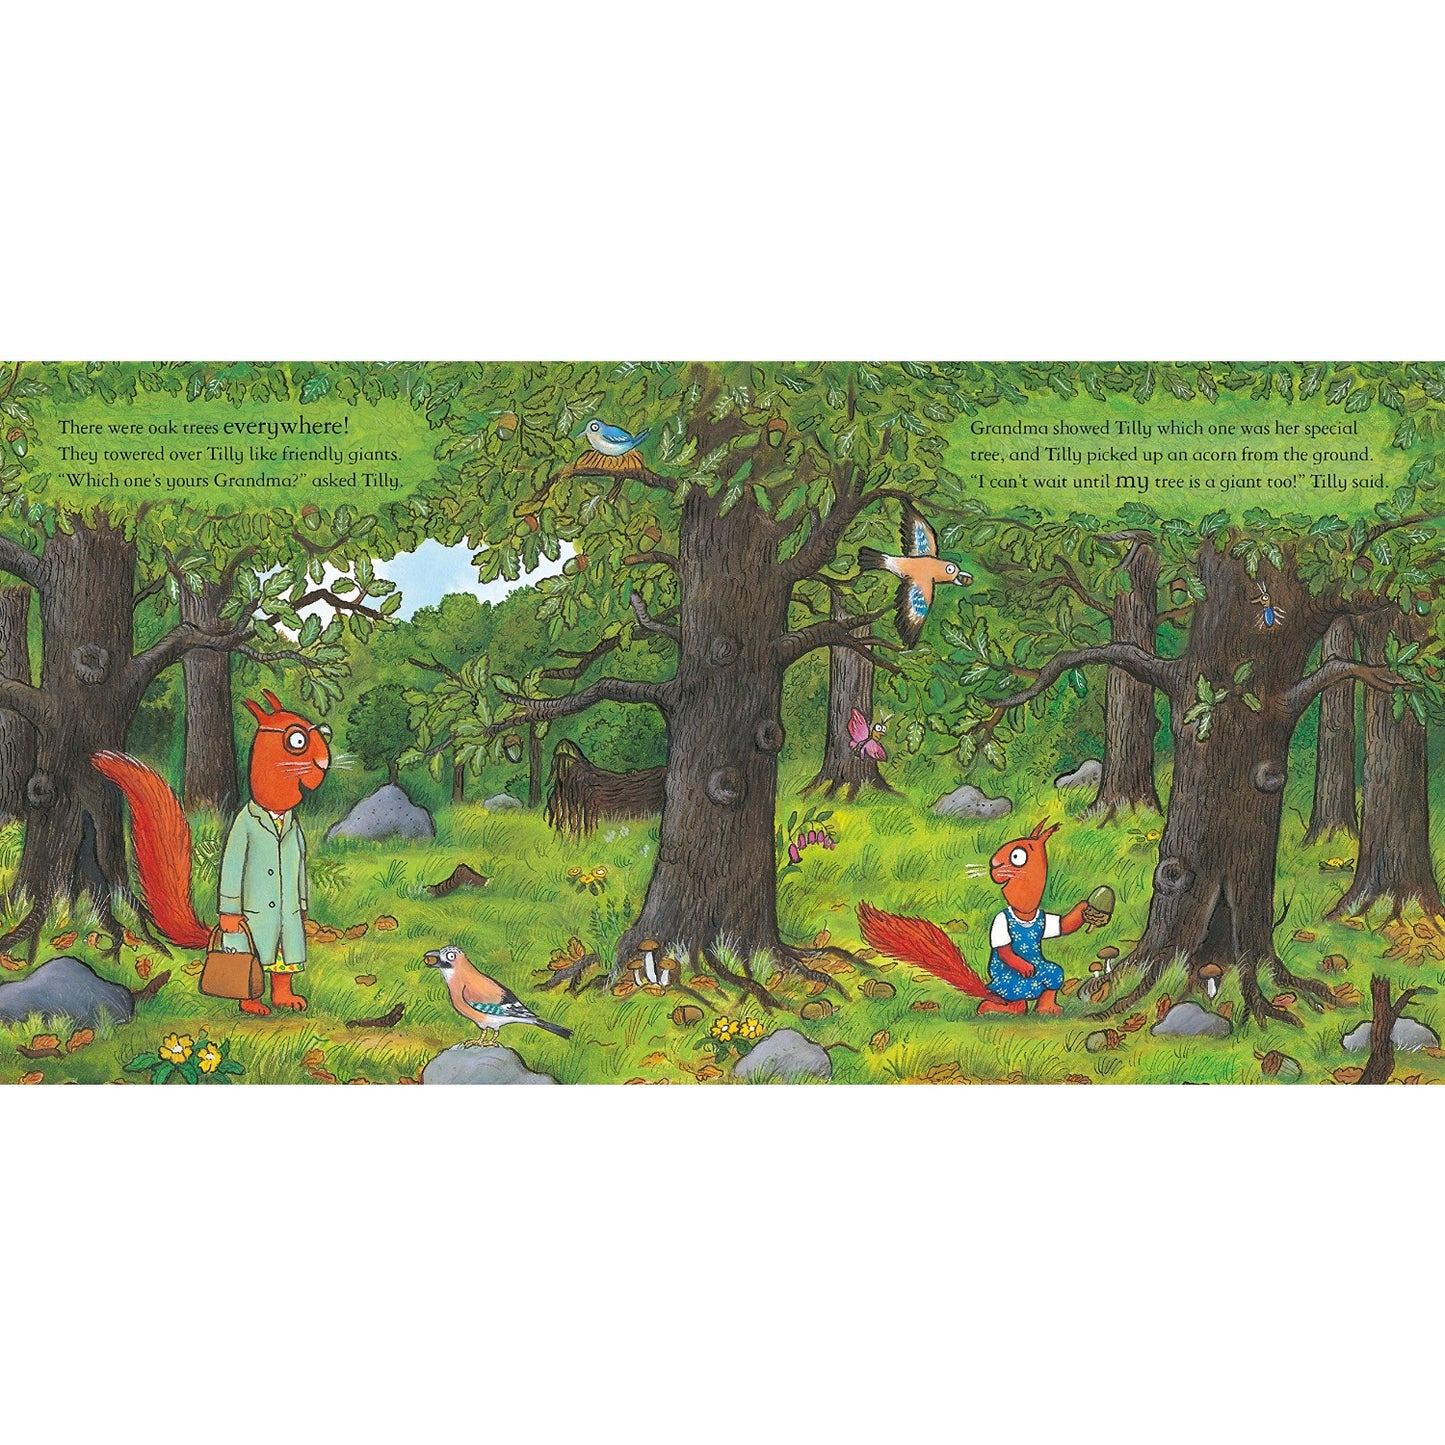 Tilly Plants a Tree | Hardcover | Children’s Book on Nature